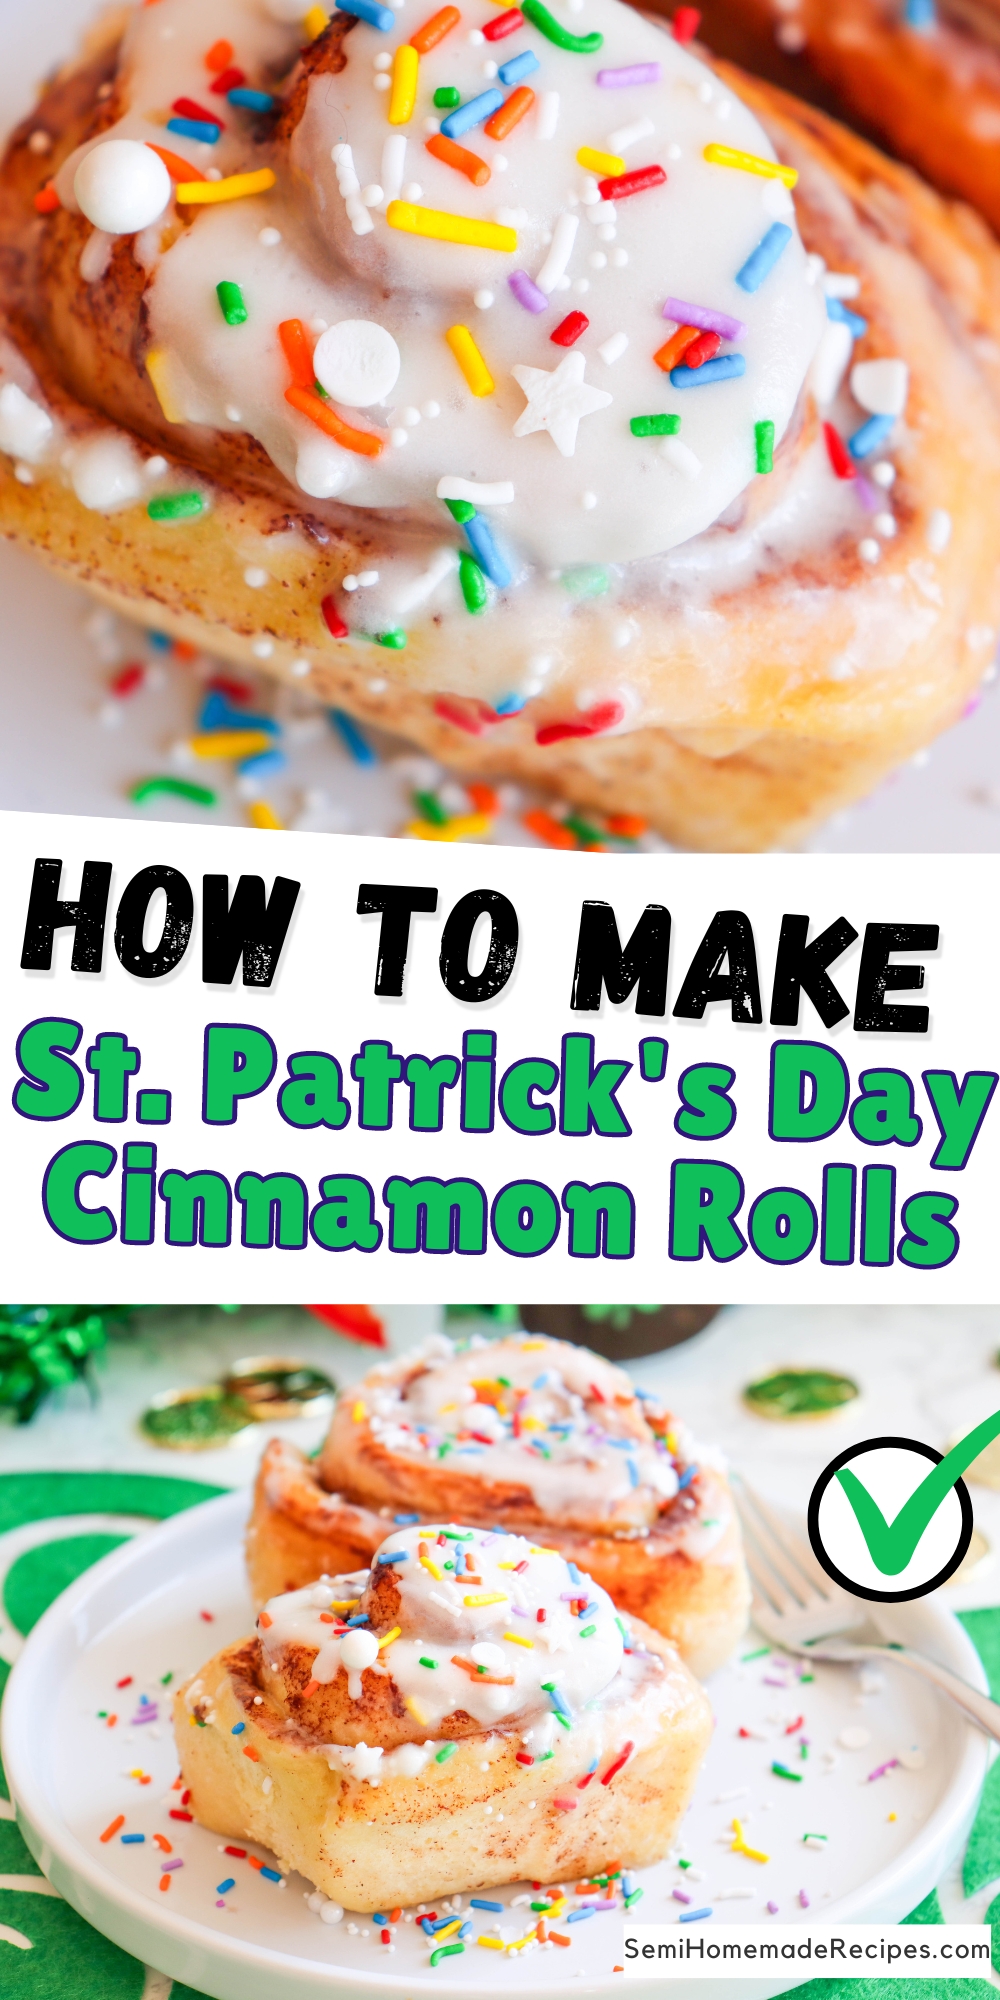 We love using this TikTok hack involving heavy cream to make some of the best cinnamon rolls! They're perfect for an easy breakfast or fun to dress up for holidays! These cinnamon rolls take 30 minutes to make and taste like Cinnabon Cinnamon Rolls. 